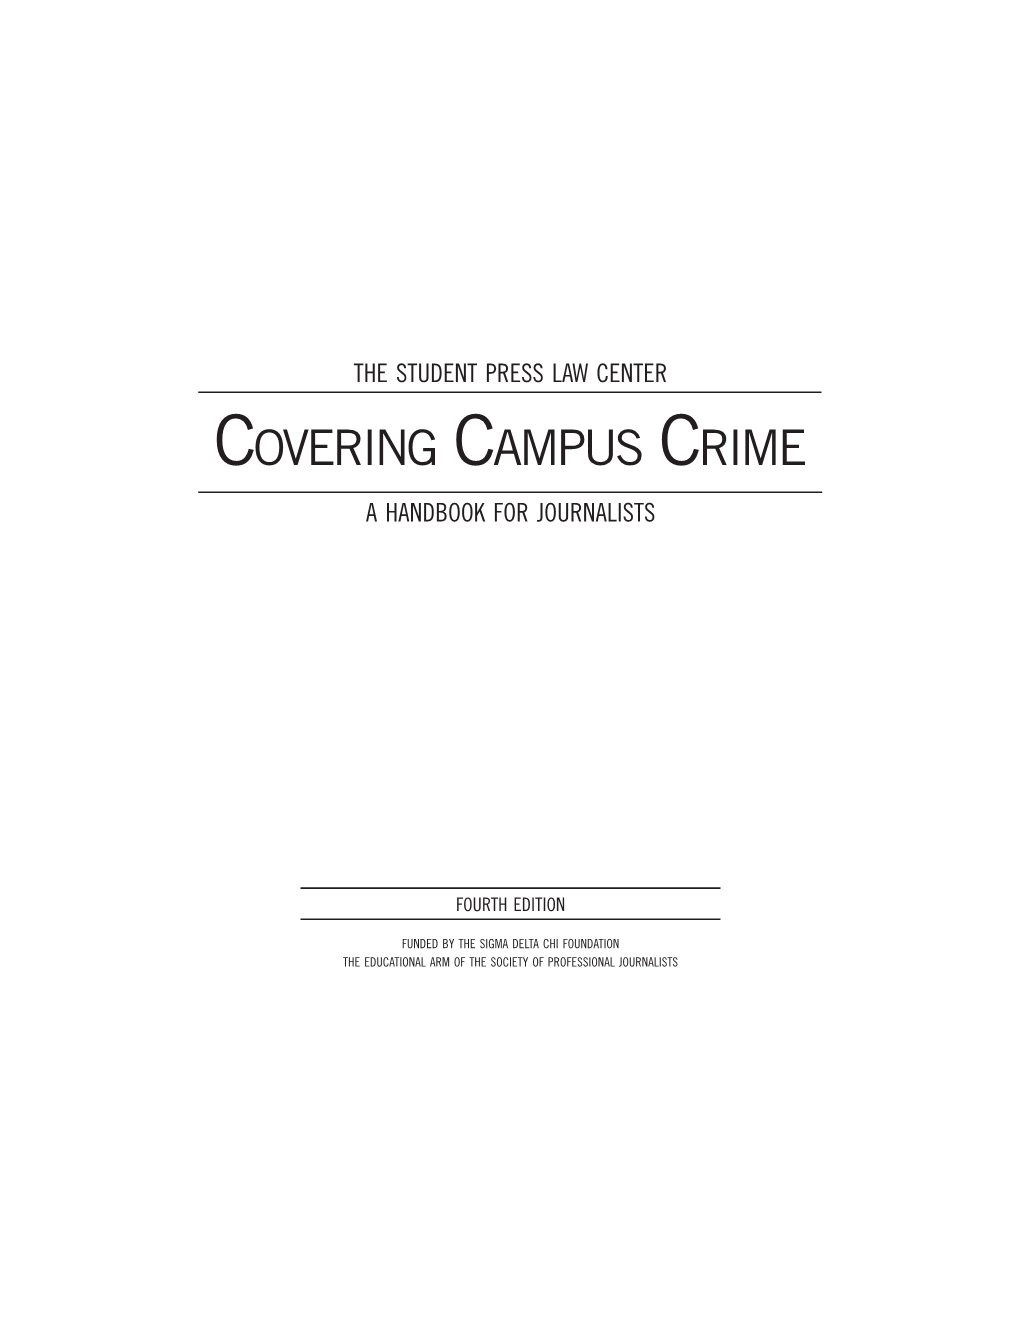 Covering Campus Crime a Handbook for Journalists